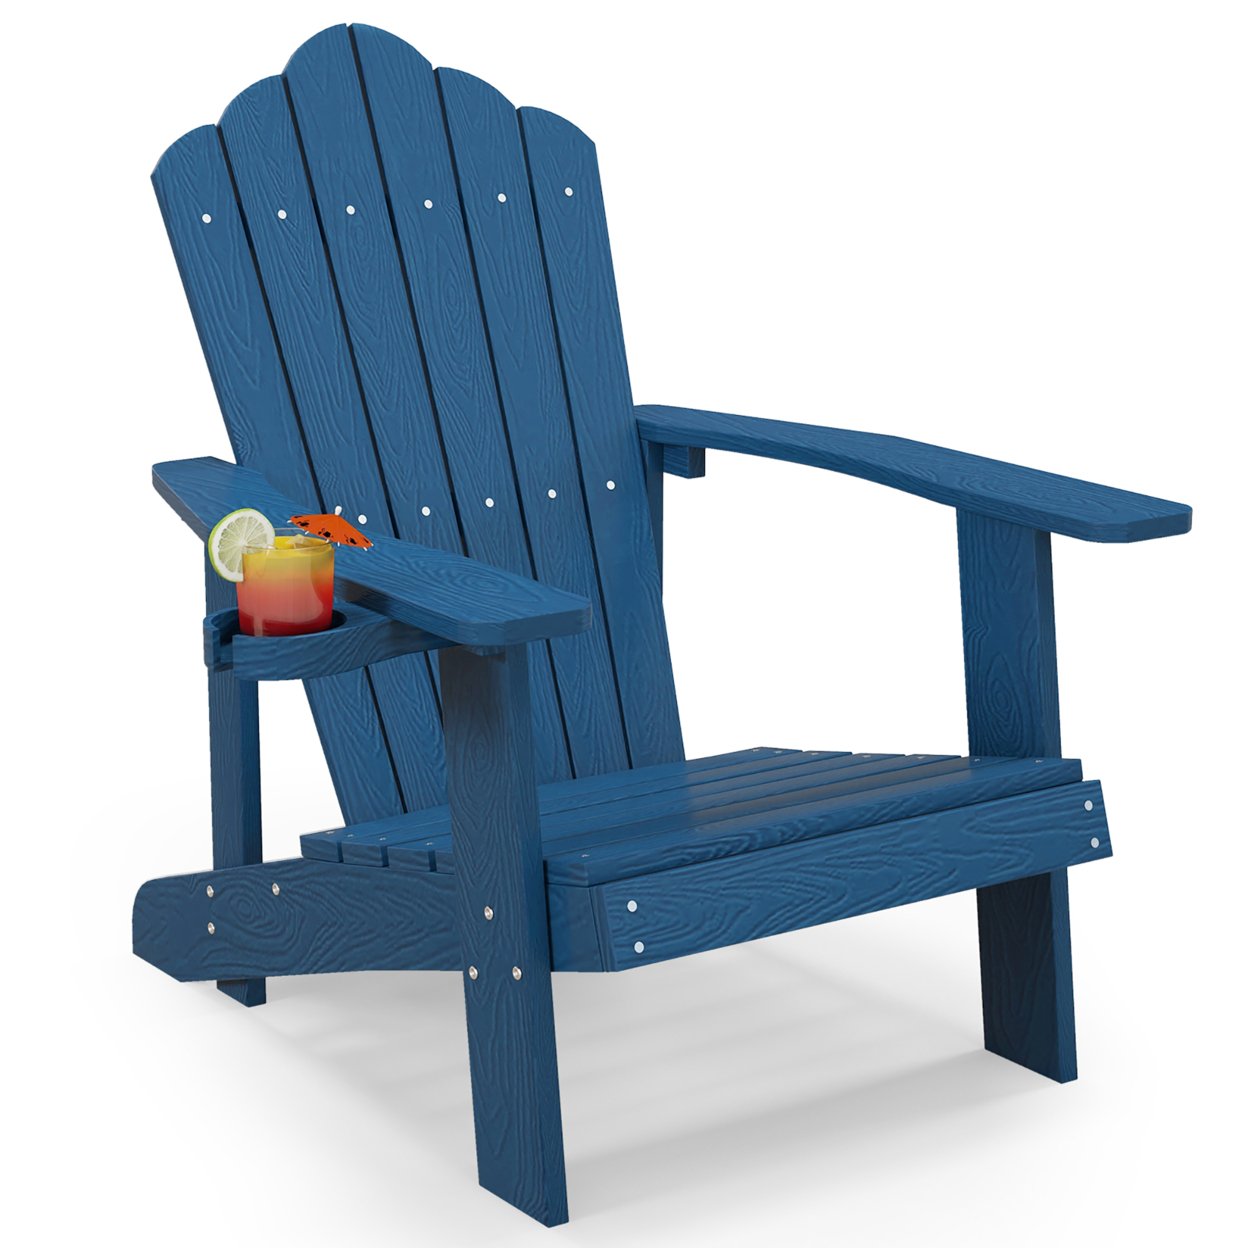 Patio HIPS Outdoor Weather Resistant Slatted Chair Adirondack Chair W/ Cup Holder - Navy